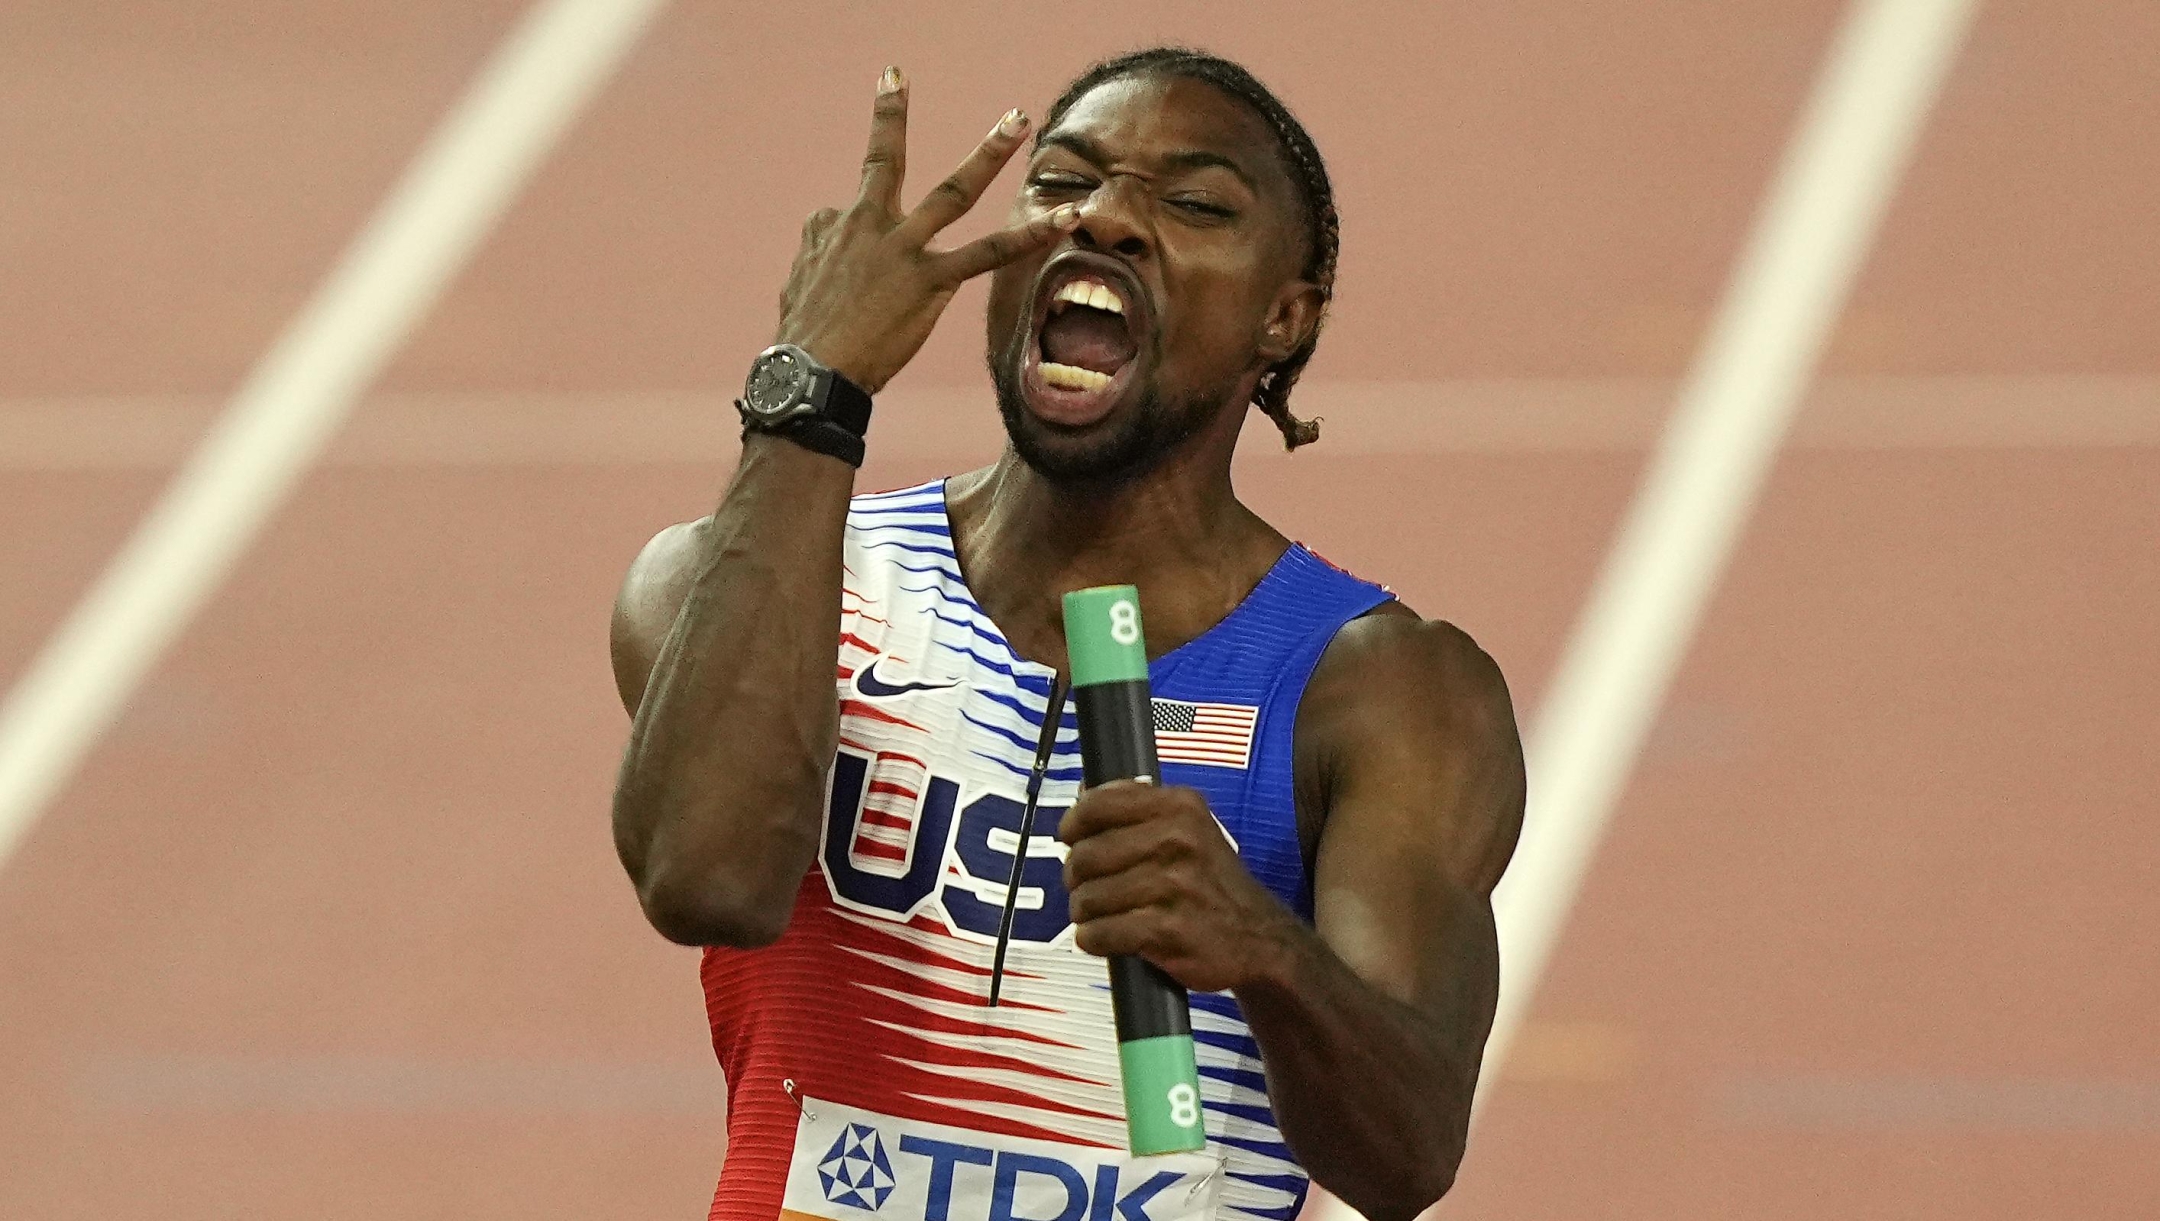 Noah Lyles, of the United States celebrates showing three fingers wanchoring his team to gold in the Men's 4x100-meters relay final during the World Athletics Championships in Budapest, Hungary, Saturday, Aug. 26, 2023. It is his third gold medal (AP Photo/Martin Meissner)